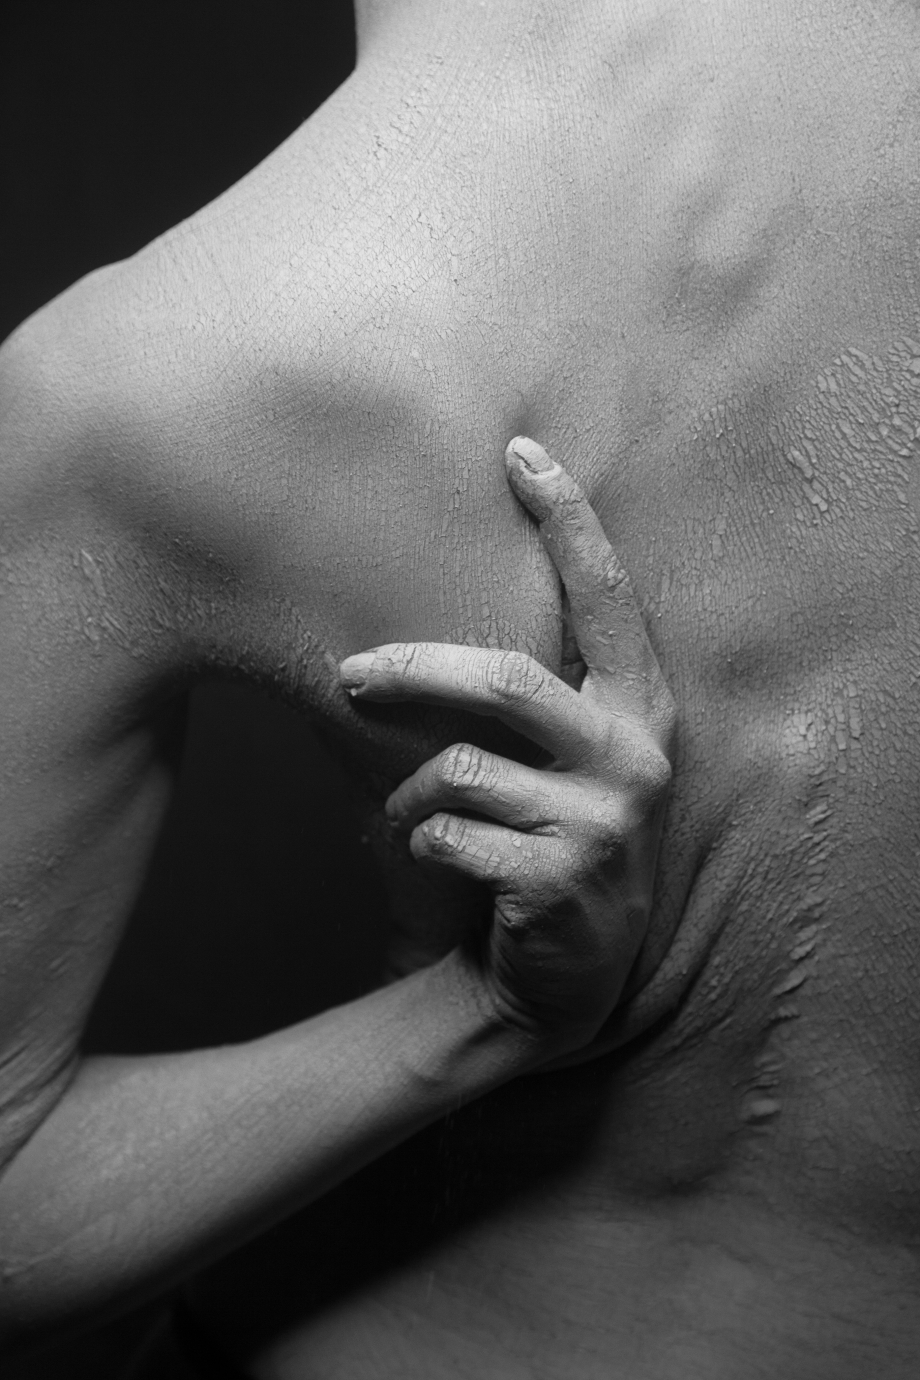 close-up-of-a-person-scratching-the-dry-and-flaky-skin-of-3219552.jpg